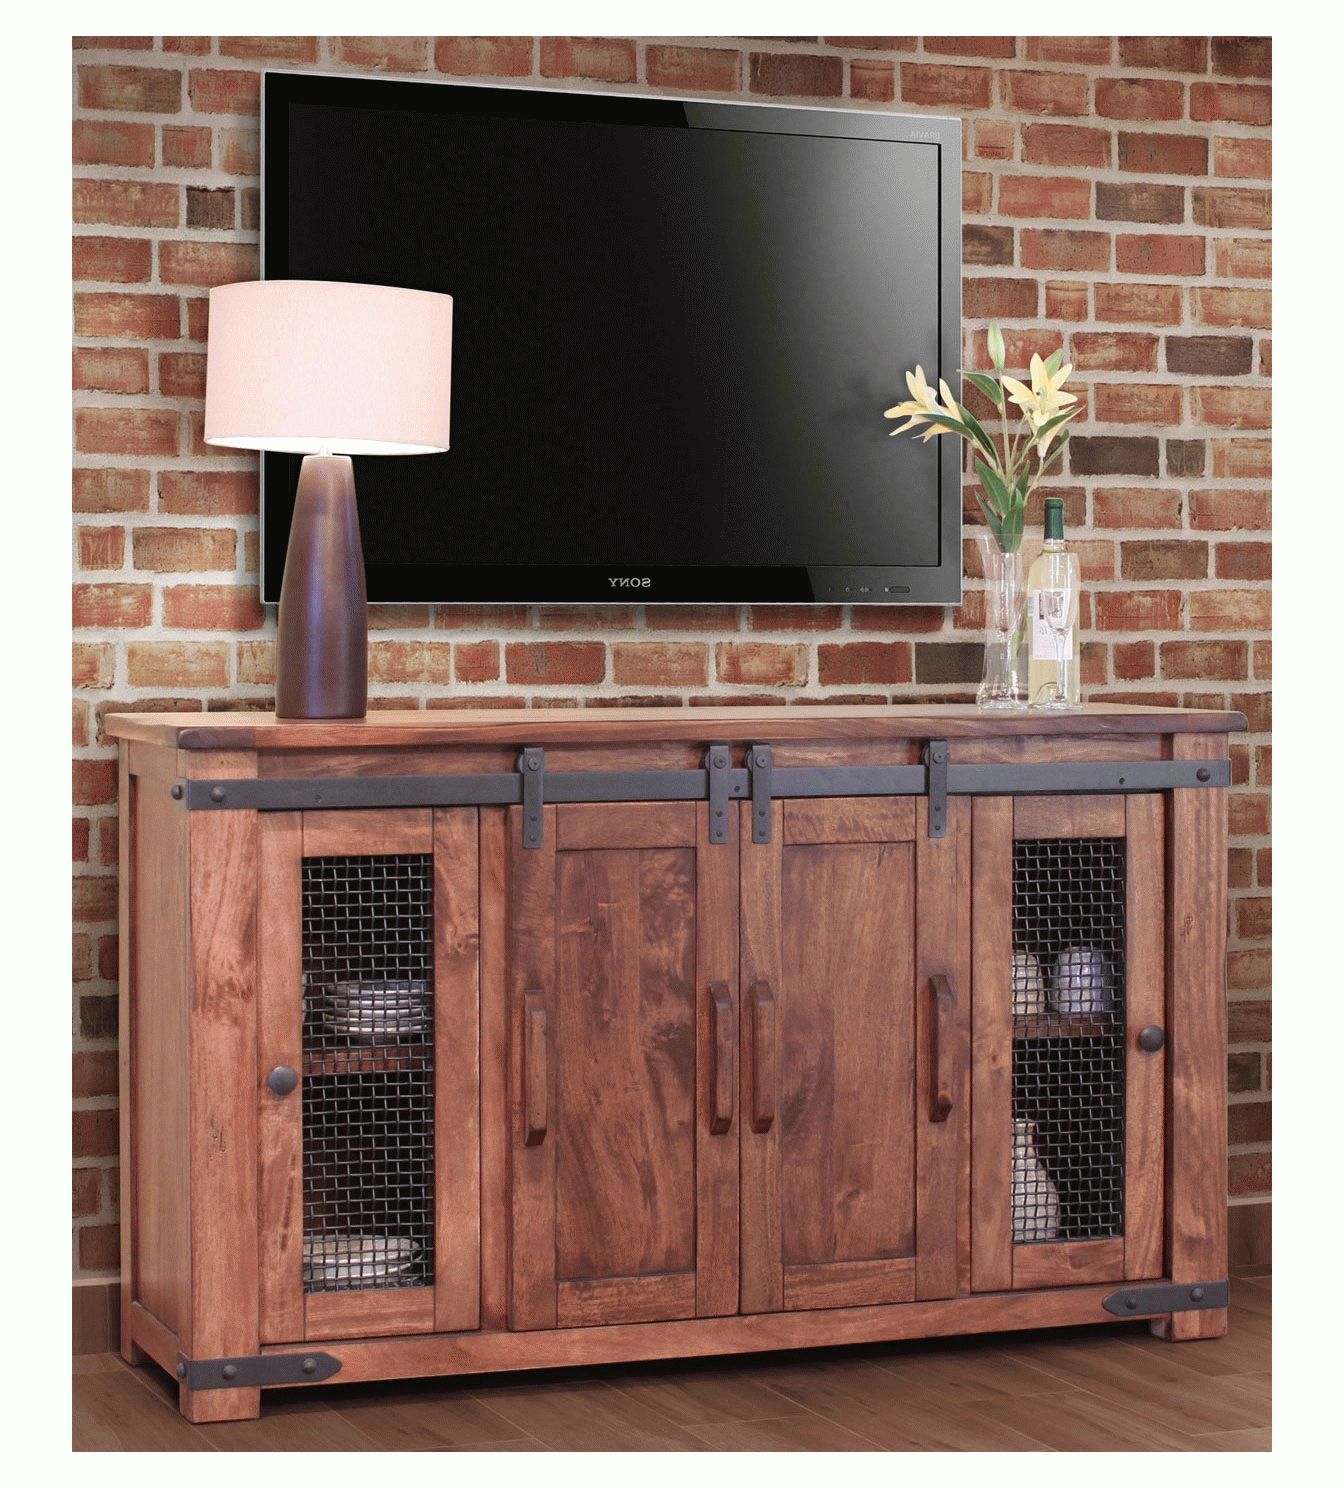 Rustic Barn Door Tv Stand, Barn Door Tv Stand Intended For Cheap Rustic Tv Stands (View 15 of 15)